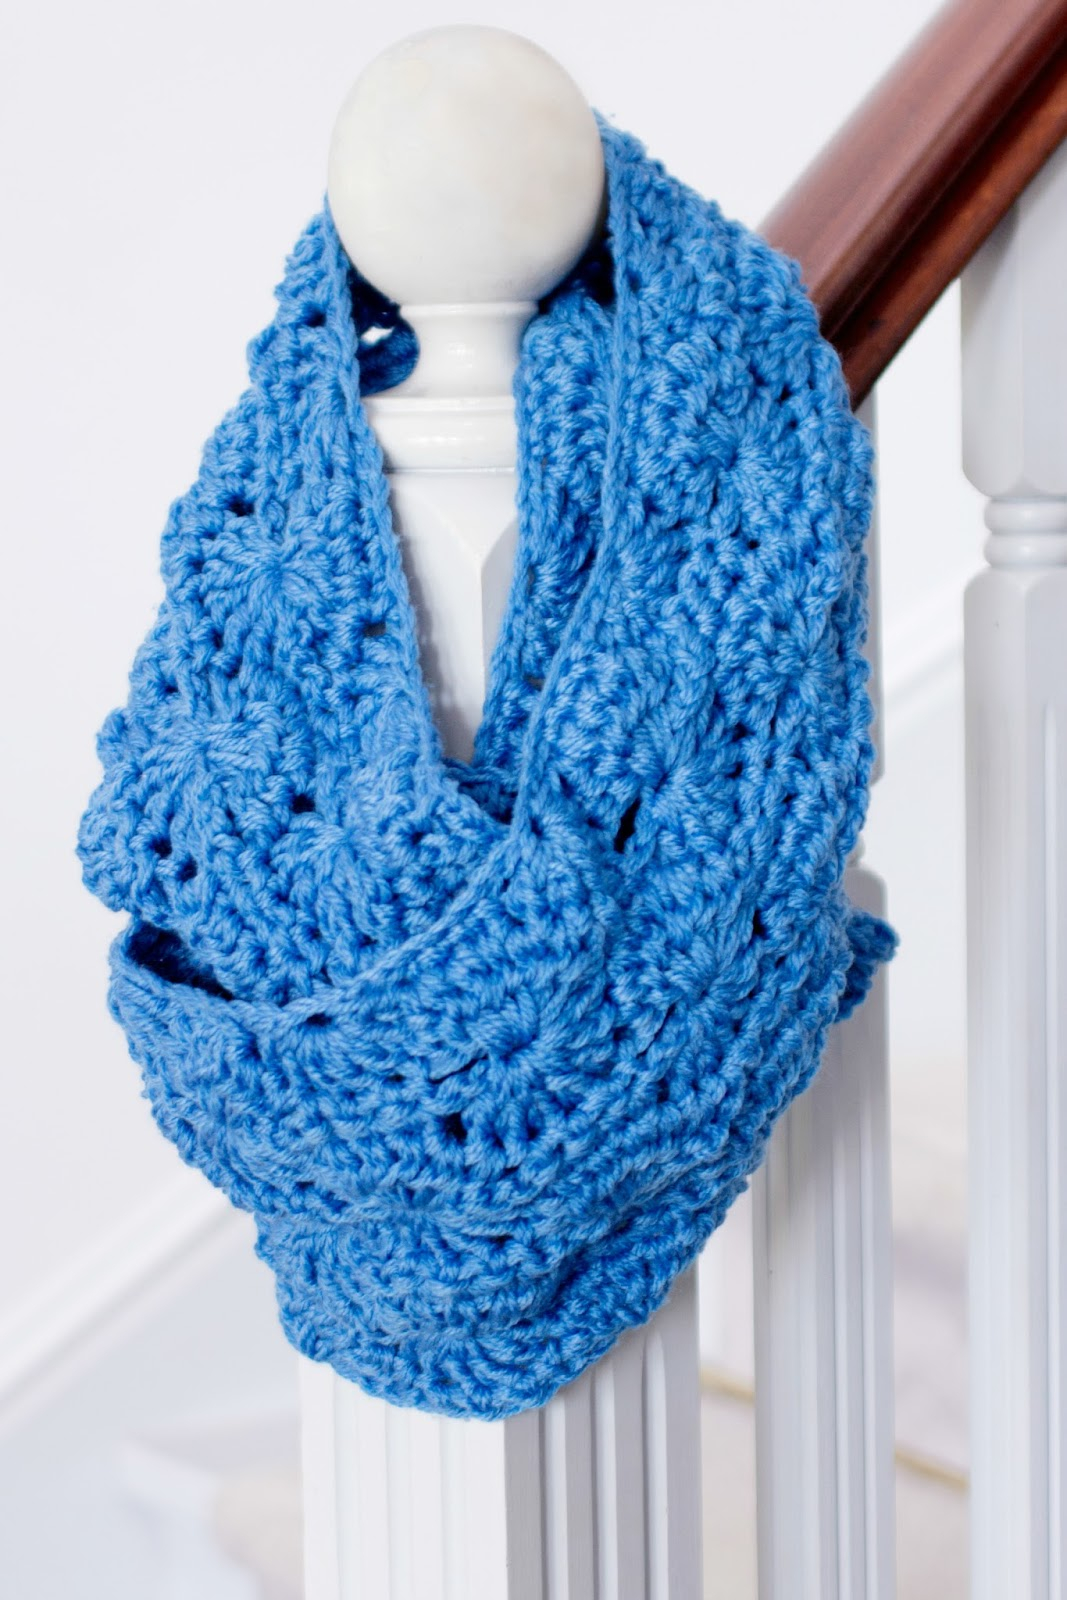 Crochet Pattern Scarf Beneficial Scarf Crochet Patterns Crochet And Knitting Patterns 2019